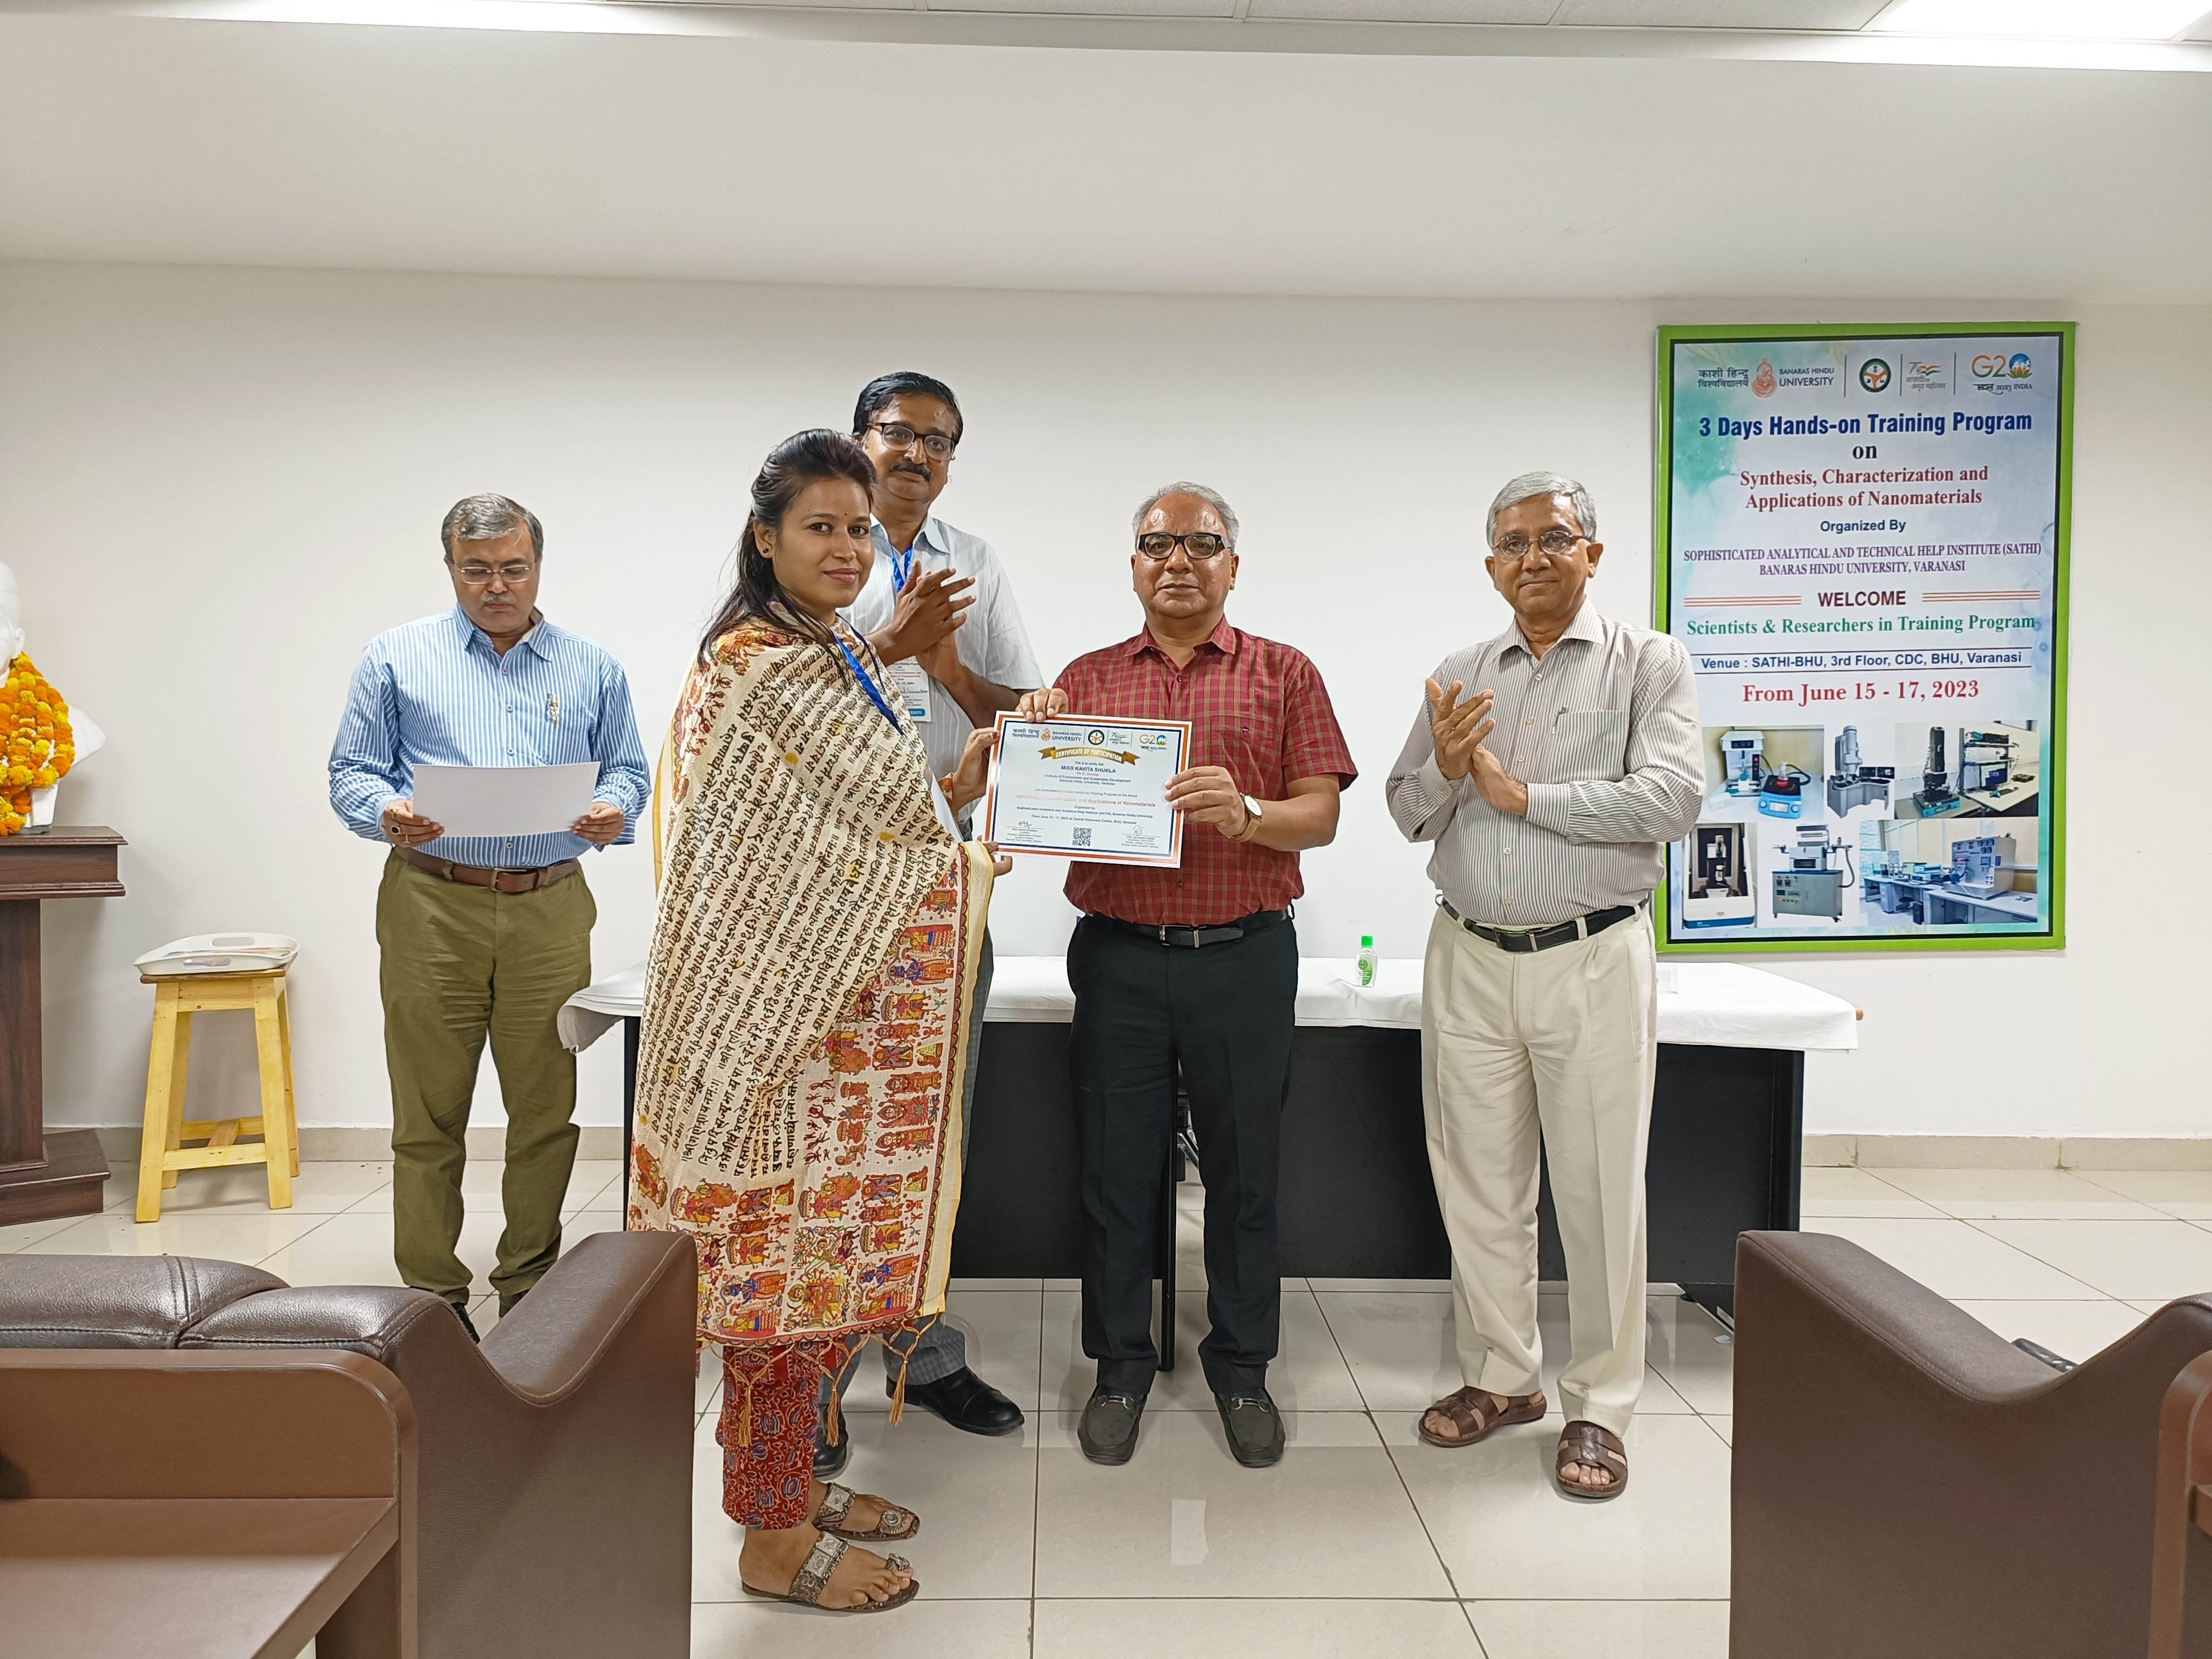 Certificate Distribution at Valedictory function of 3-Day Hands-on Training Program on Synthesis, Characterization and Applications of Nanomaterials